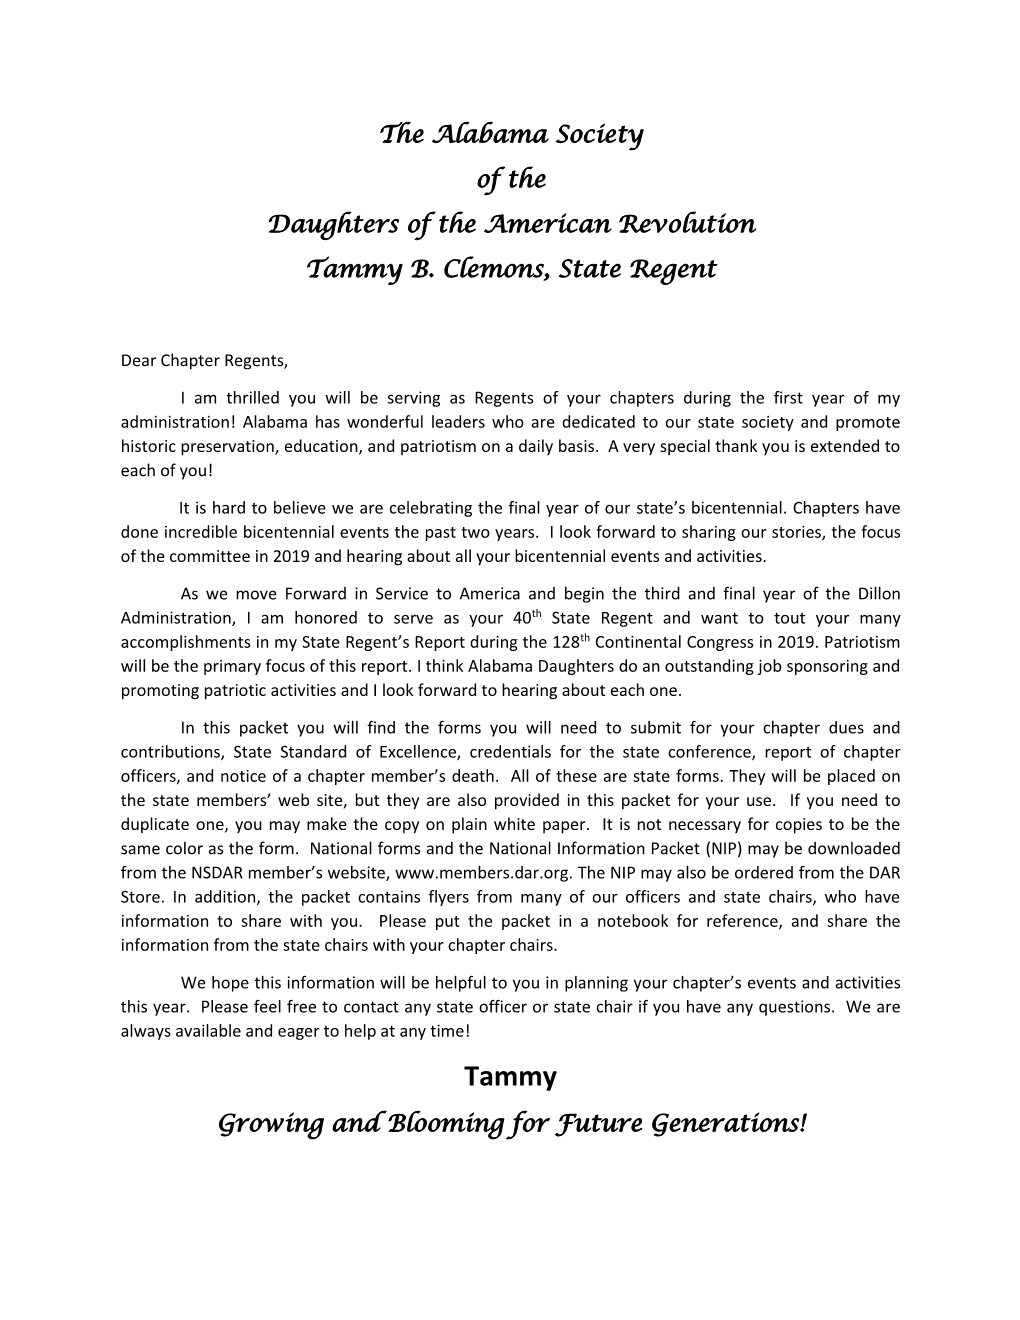 The Alabama Society of the Daughters of the American Revolution Tammy B